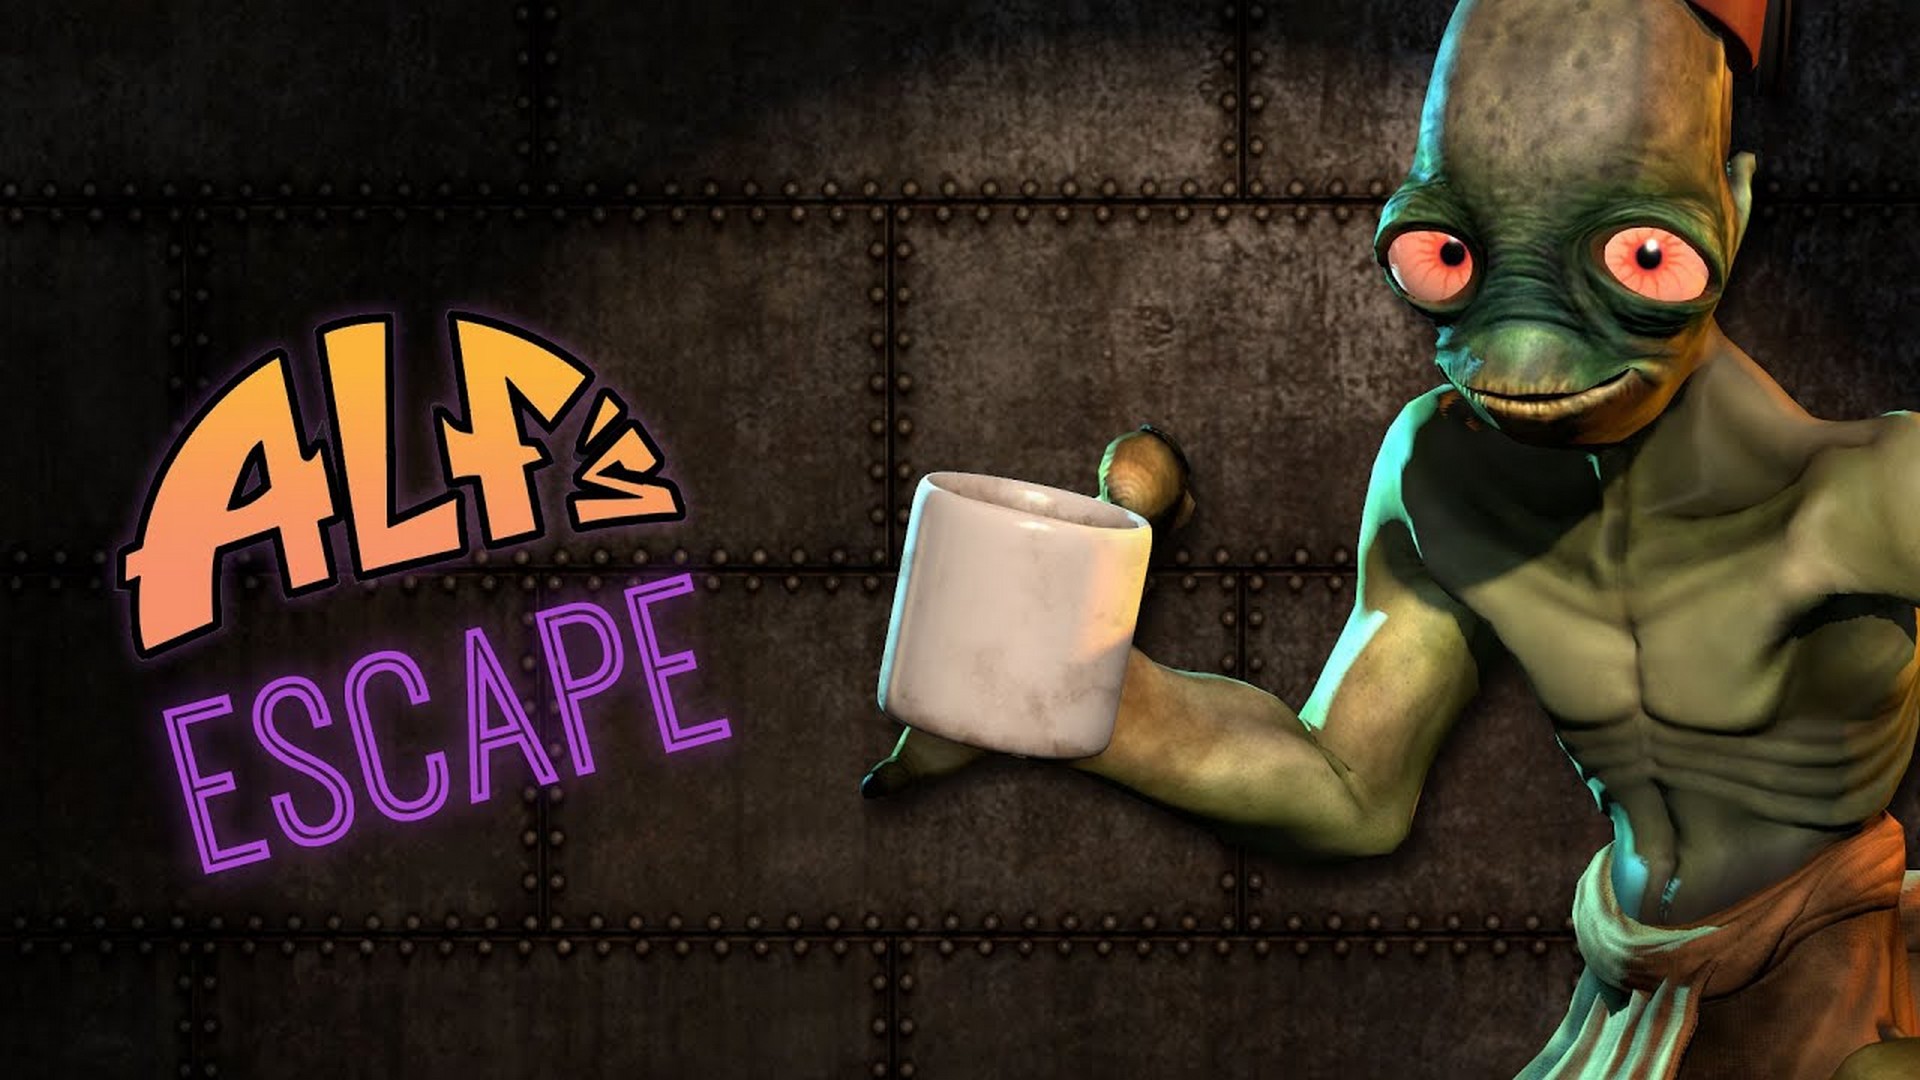 Oddworld: New ‘N’ Tasty – Alf’s Escape DLC – Now Available For Nintendo Switch